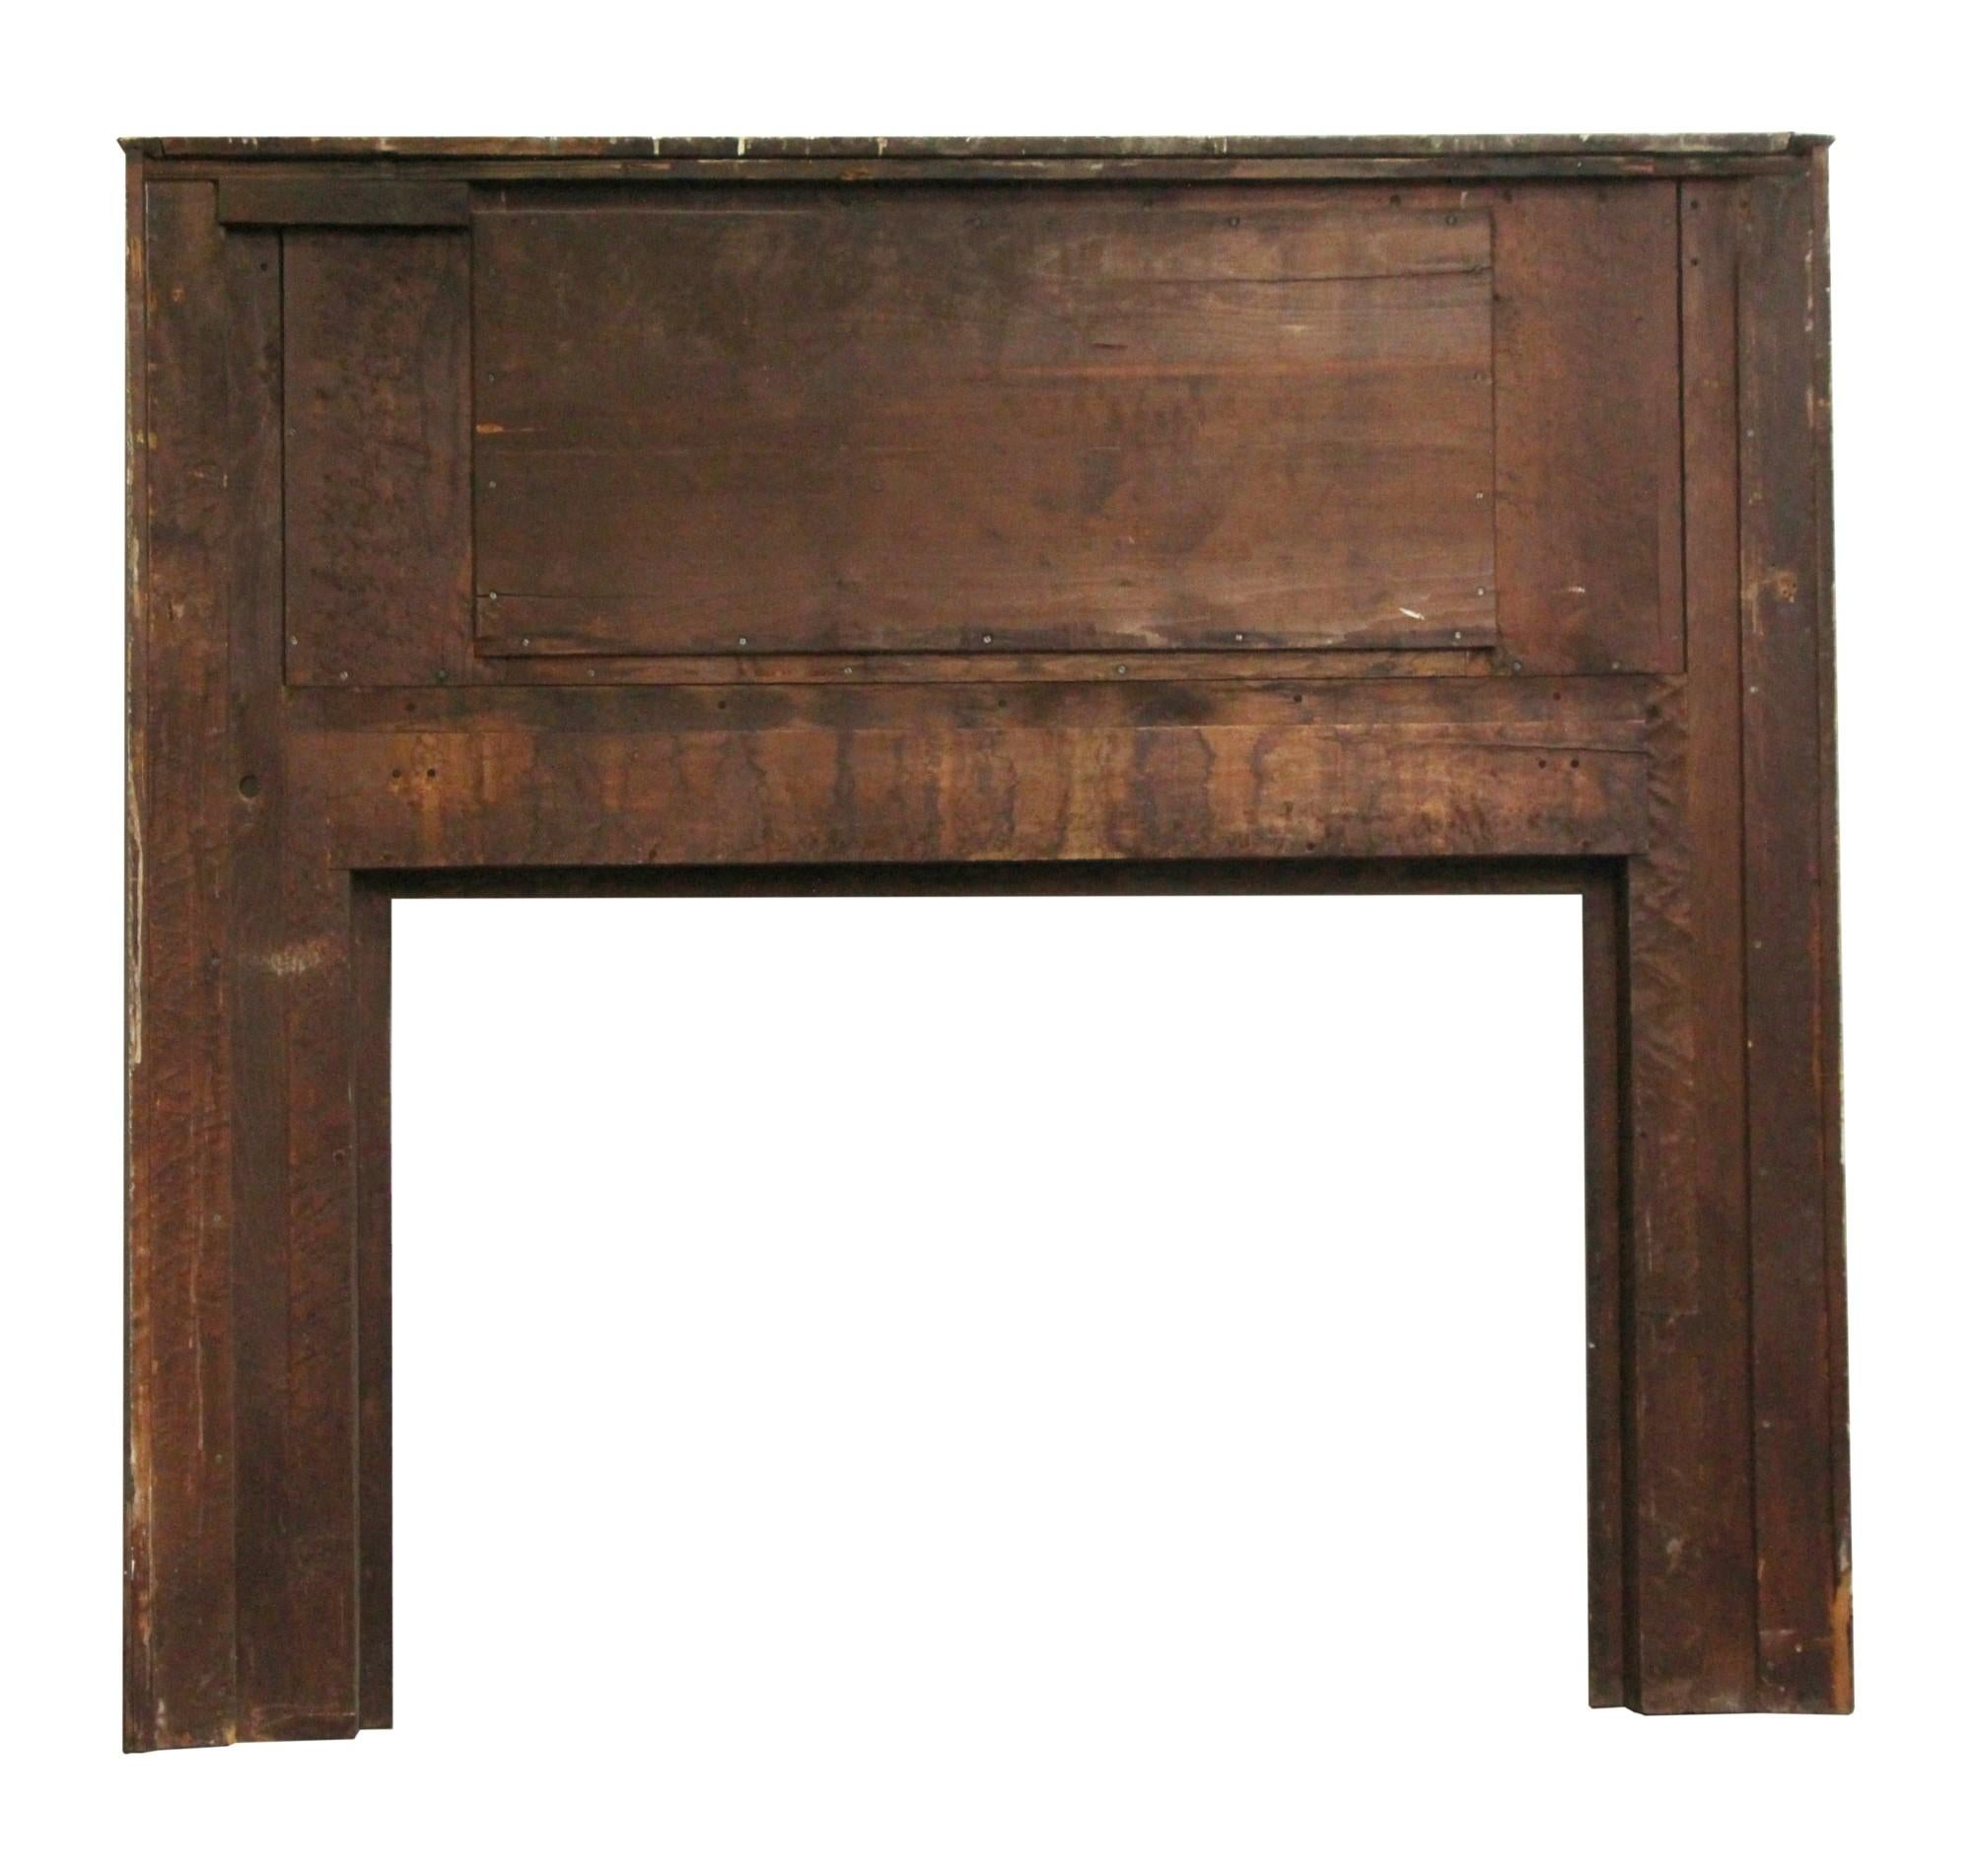 1905 Wooden Mantel with Beveled Mirror 7